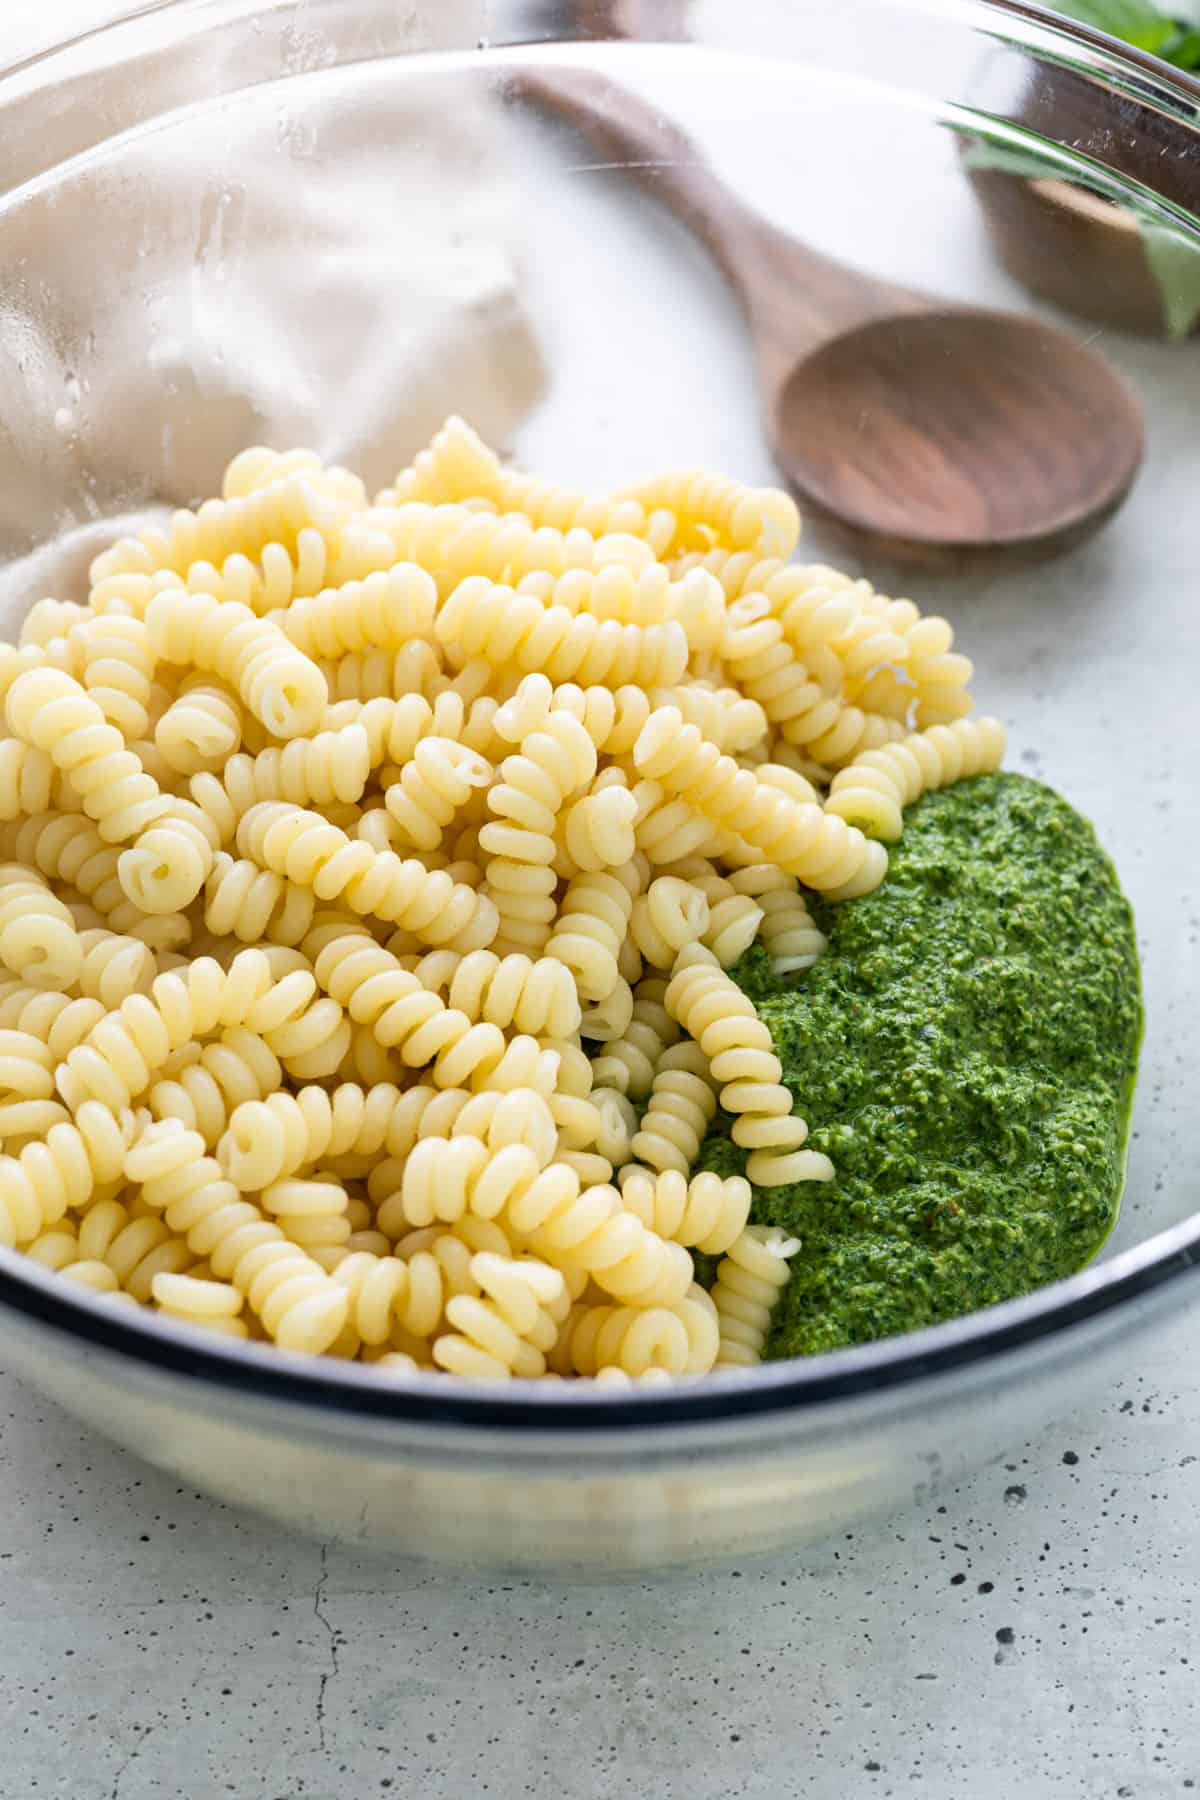 A large bowl of noodles and spinach pesto.